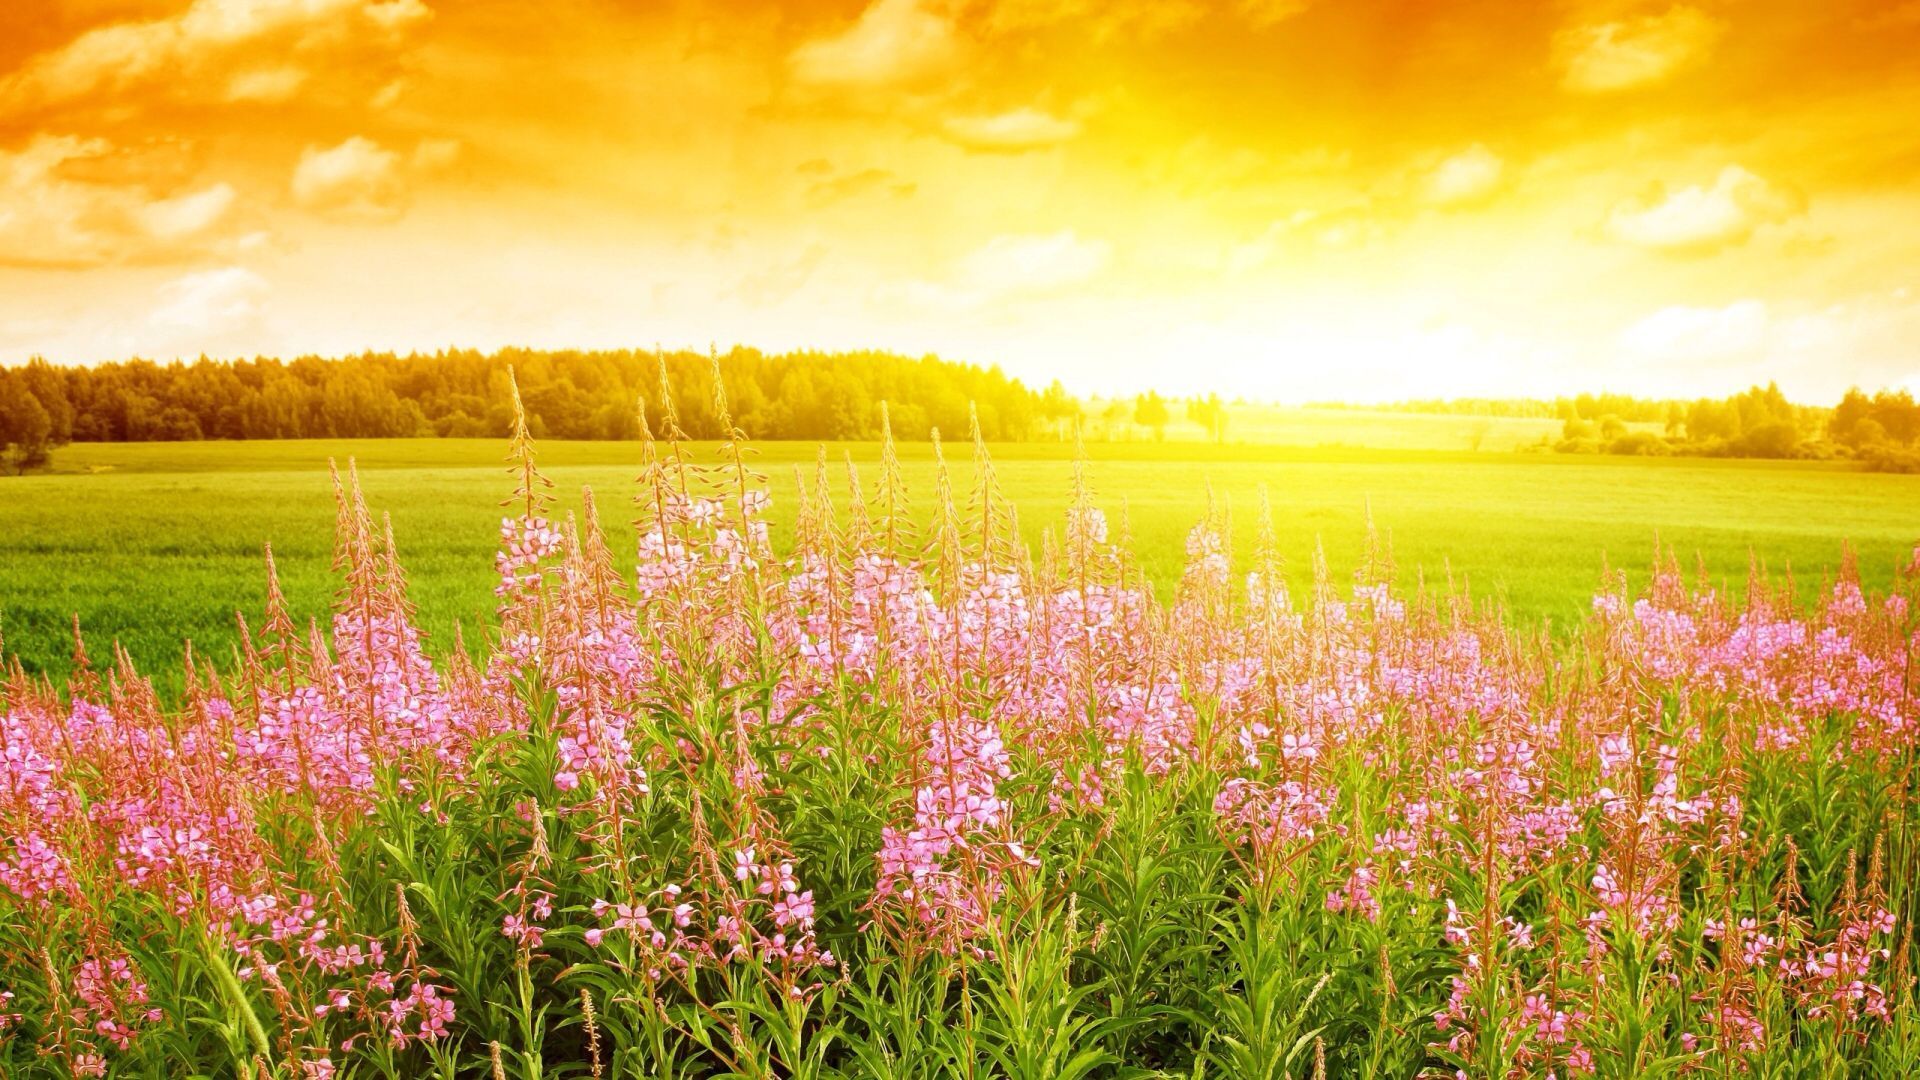 Summer Countryside Wallpaper Free Summer Countryside Background